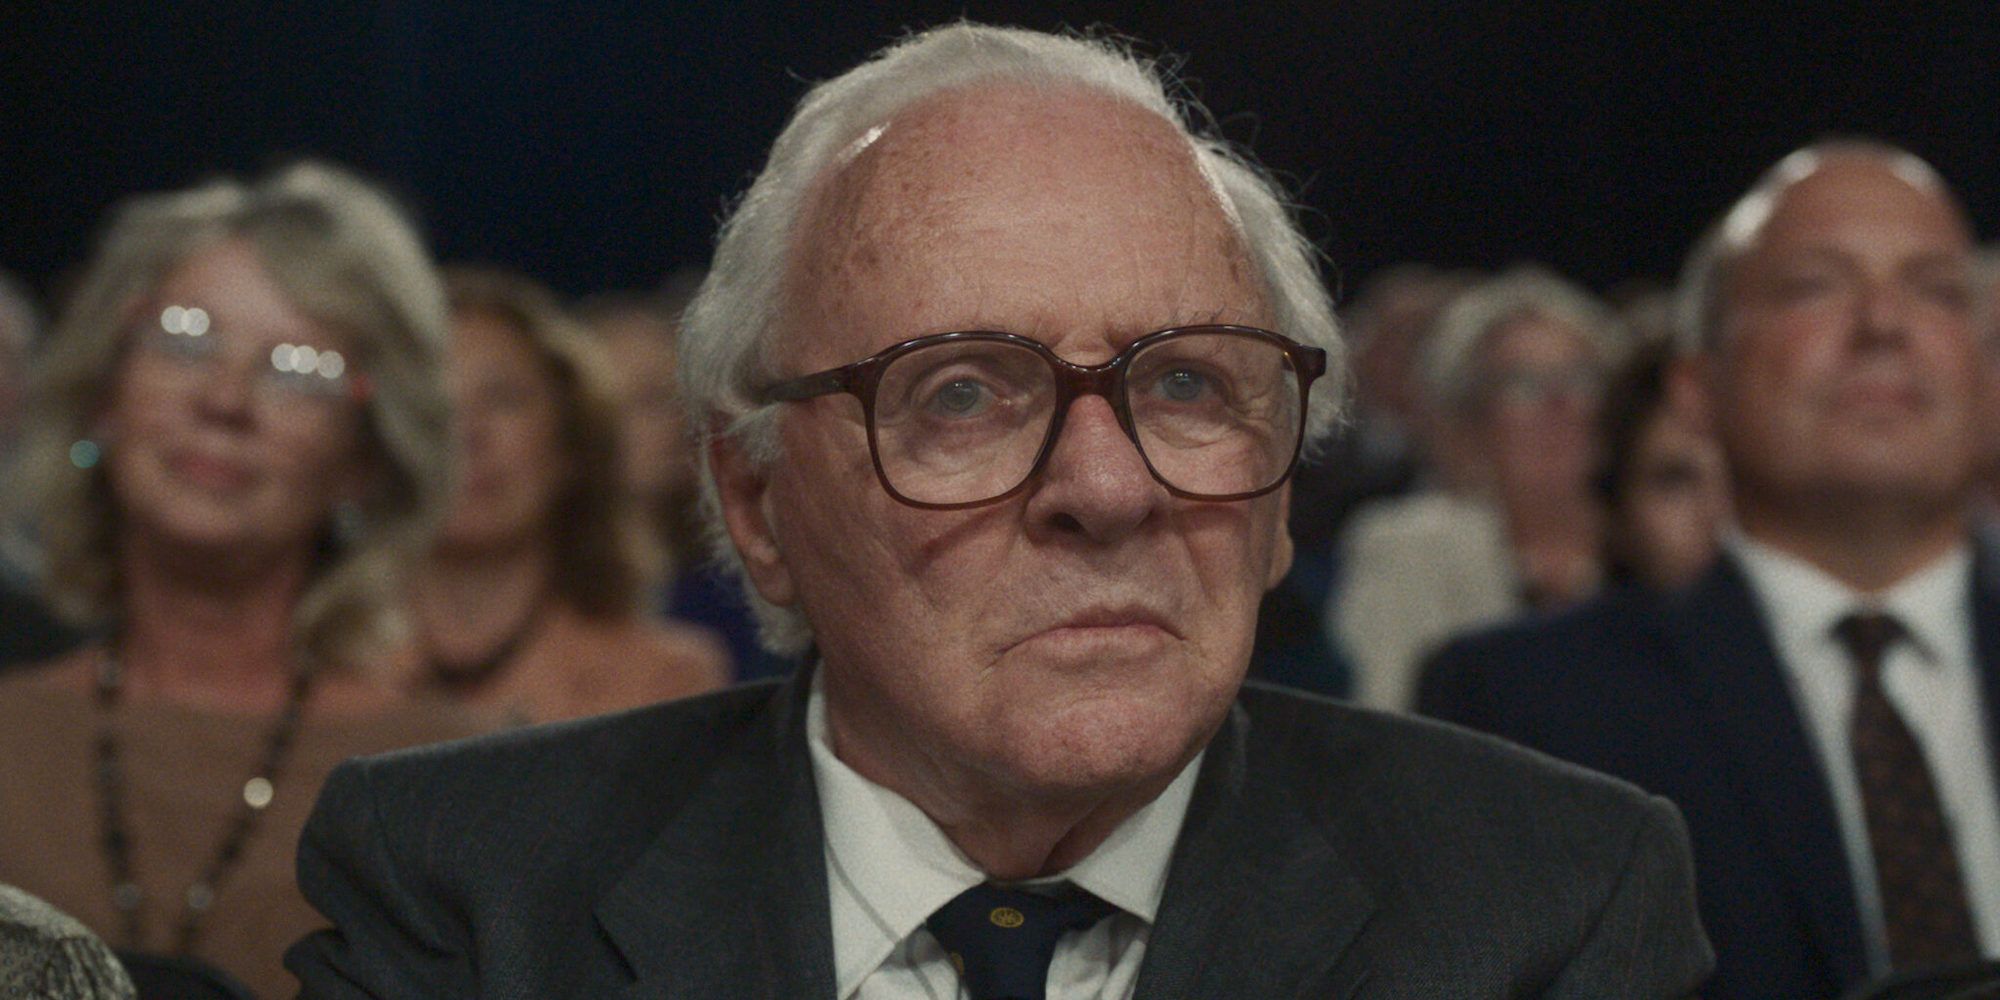 Anthony Hopkins, playing Nicholas Winton, sitting in a crowd with glasses on